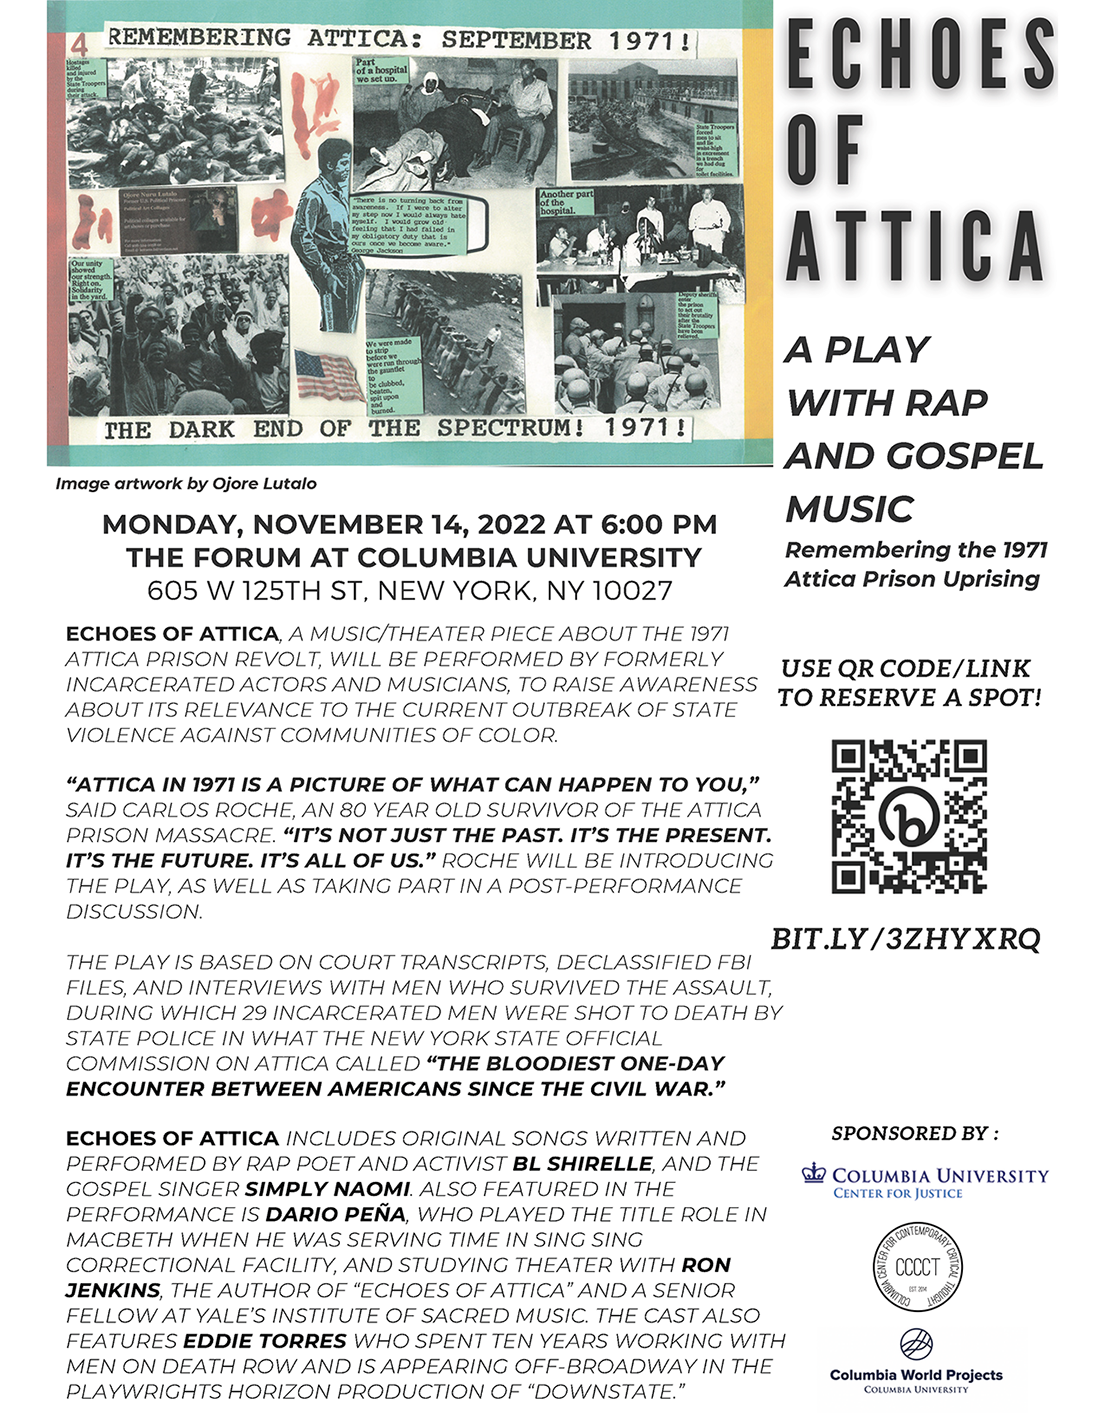 Echoes of Attica Flyer